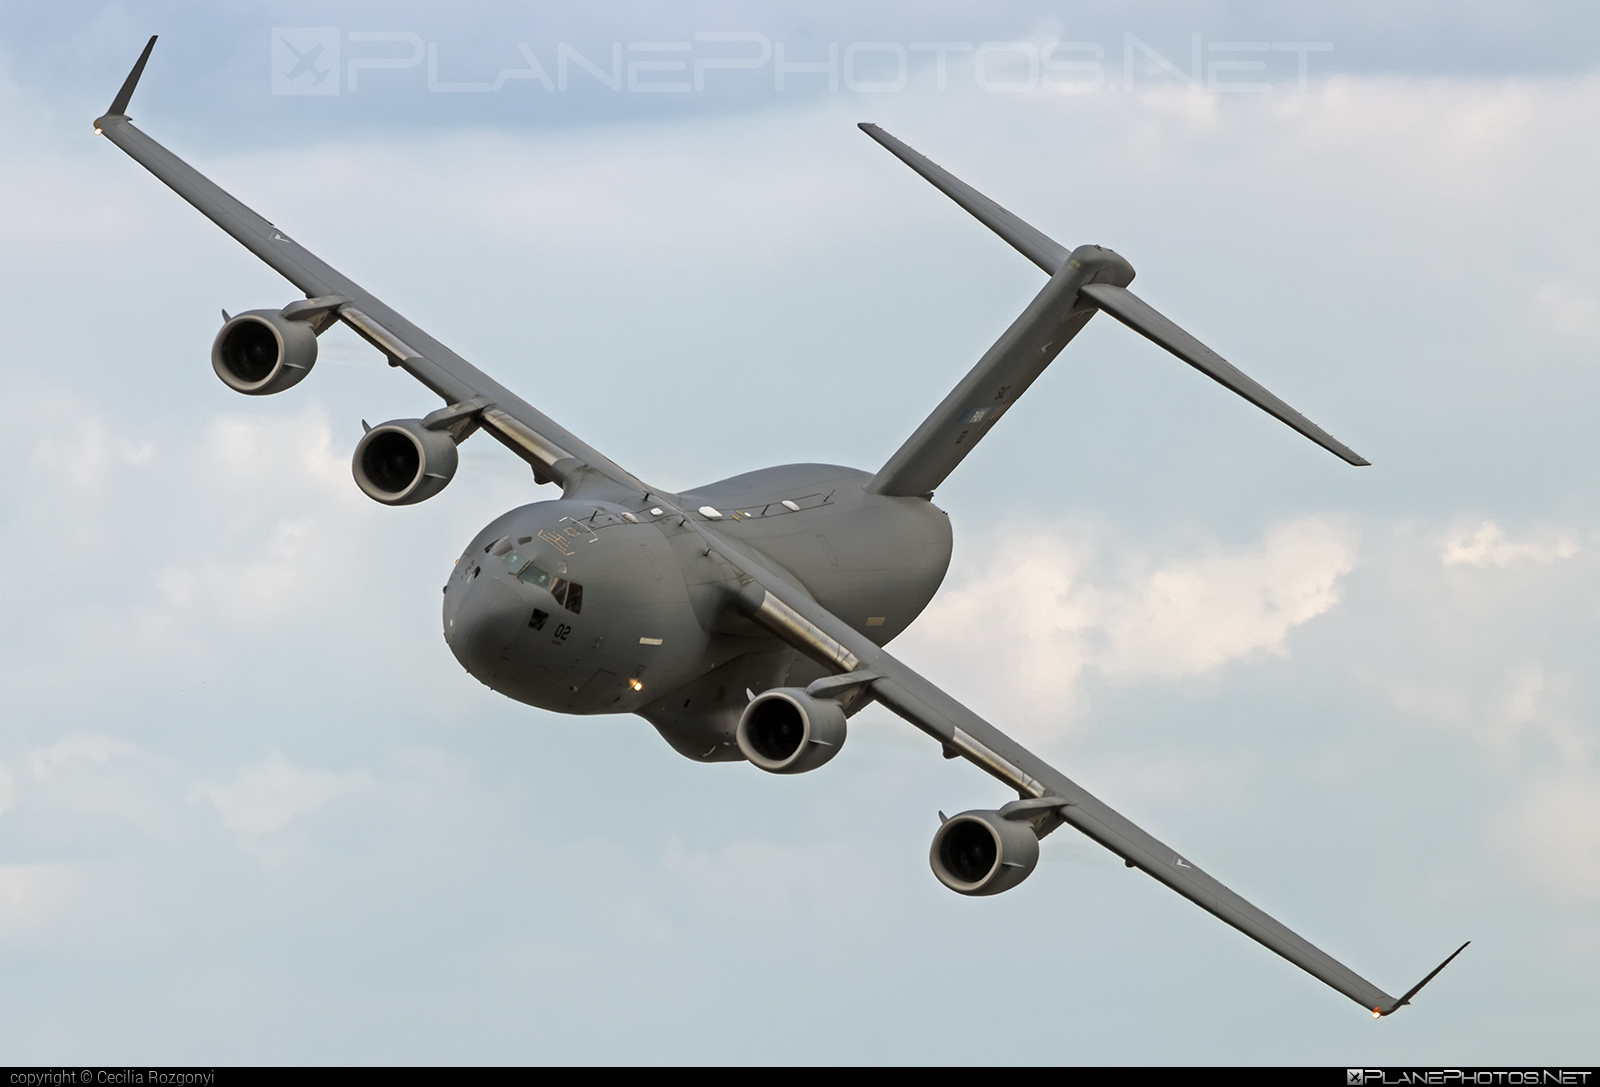 Boeing C-17A Globemaster III - 02 operated by NATO Strategic Airlift Capability (SAC) #boeing #c17 #c17globemaster #globemaster #globemasteriii #natostrategicairliftcapability #strategicairliftcapability